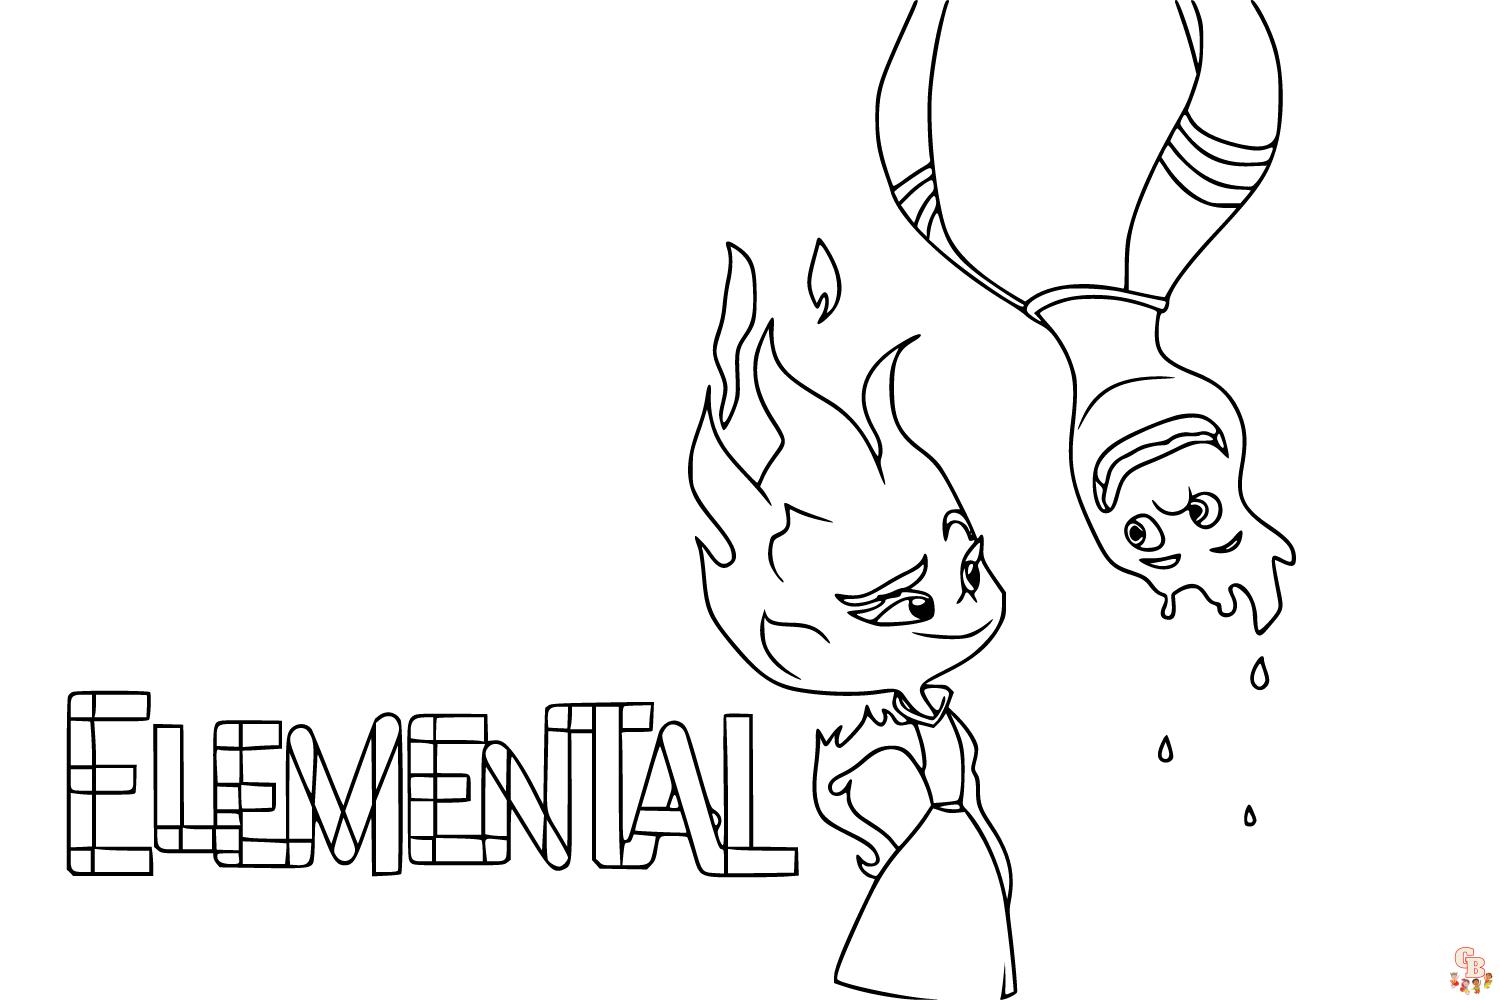 Wade Ripple and Ember Lumen elemental coloring pages 12